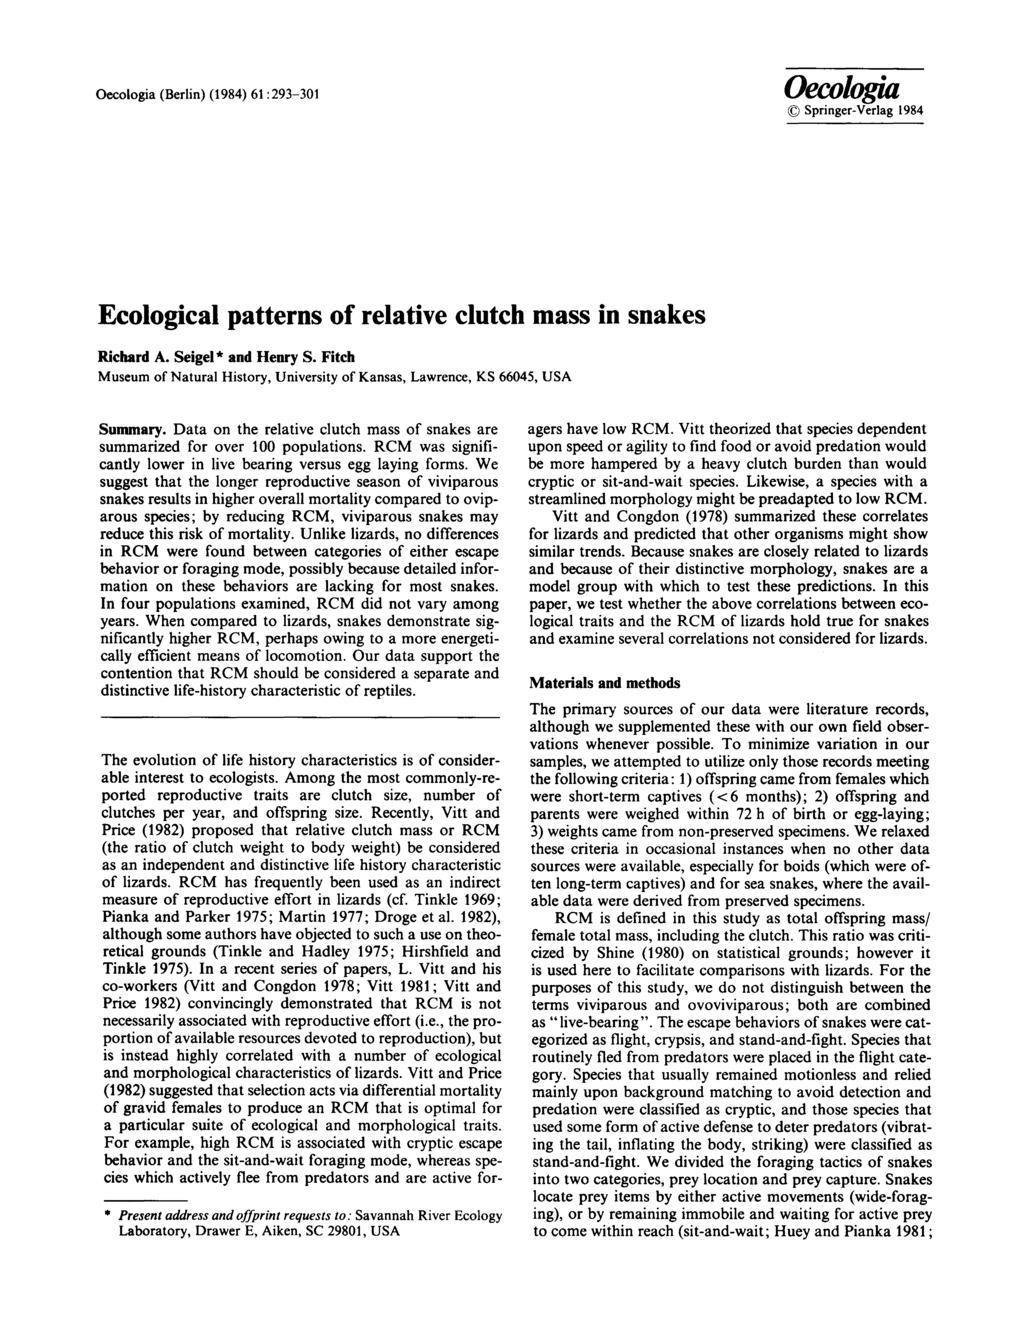 Oecologia (Berlin) (1984) 61:293-301 OecOlogi? Springer-Verlag 1984 Ecological patterns of relative clutch mass in snakes Richard A. Seigel* and Henry S.